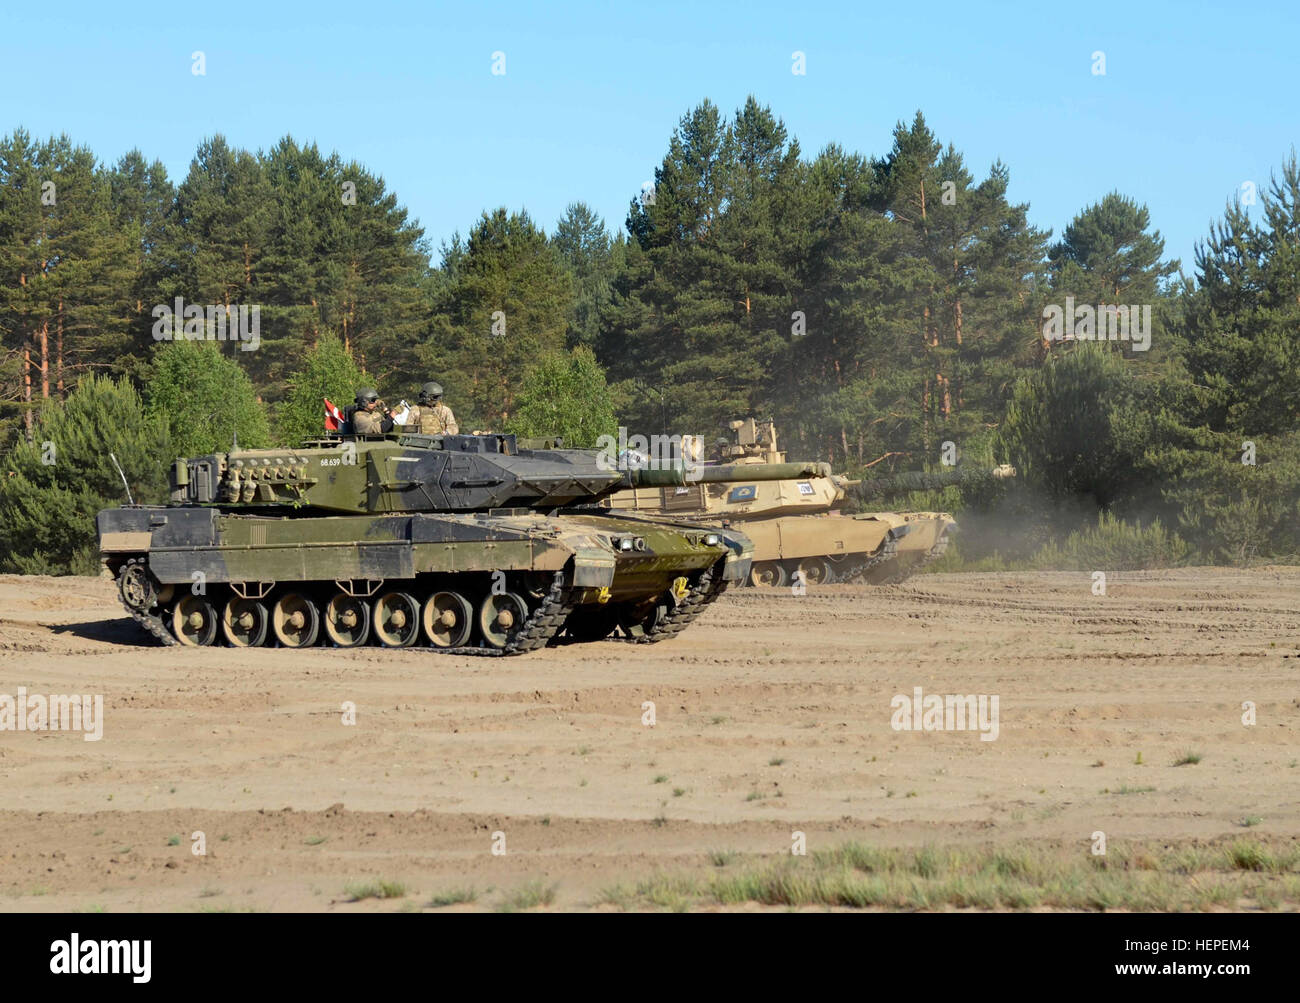 U.S. Army tank crews assigned to Company D, 2nd Battalion, 7th Infantry  Regiment, 1st Armored Brigade Combat Team, 3rd Infantry Division, maneuver  their M1A2 Abrams Main Battle Tanks alongside Danish Army tank